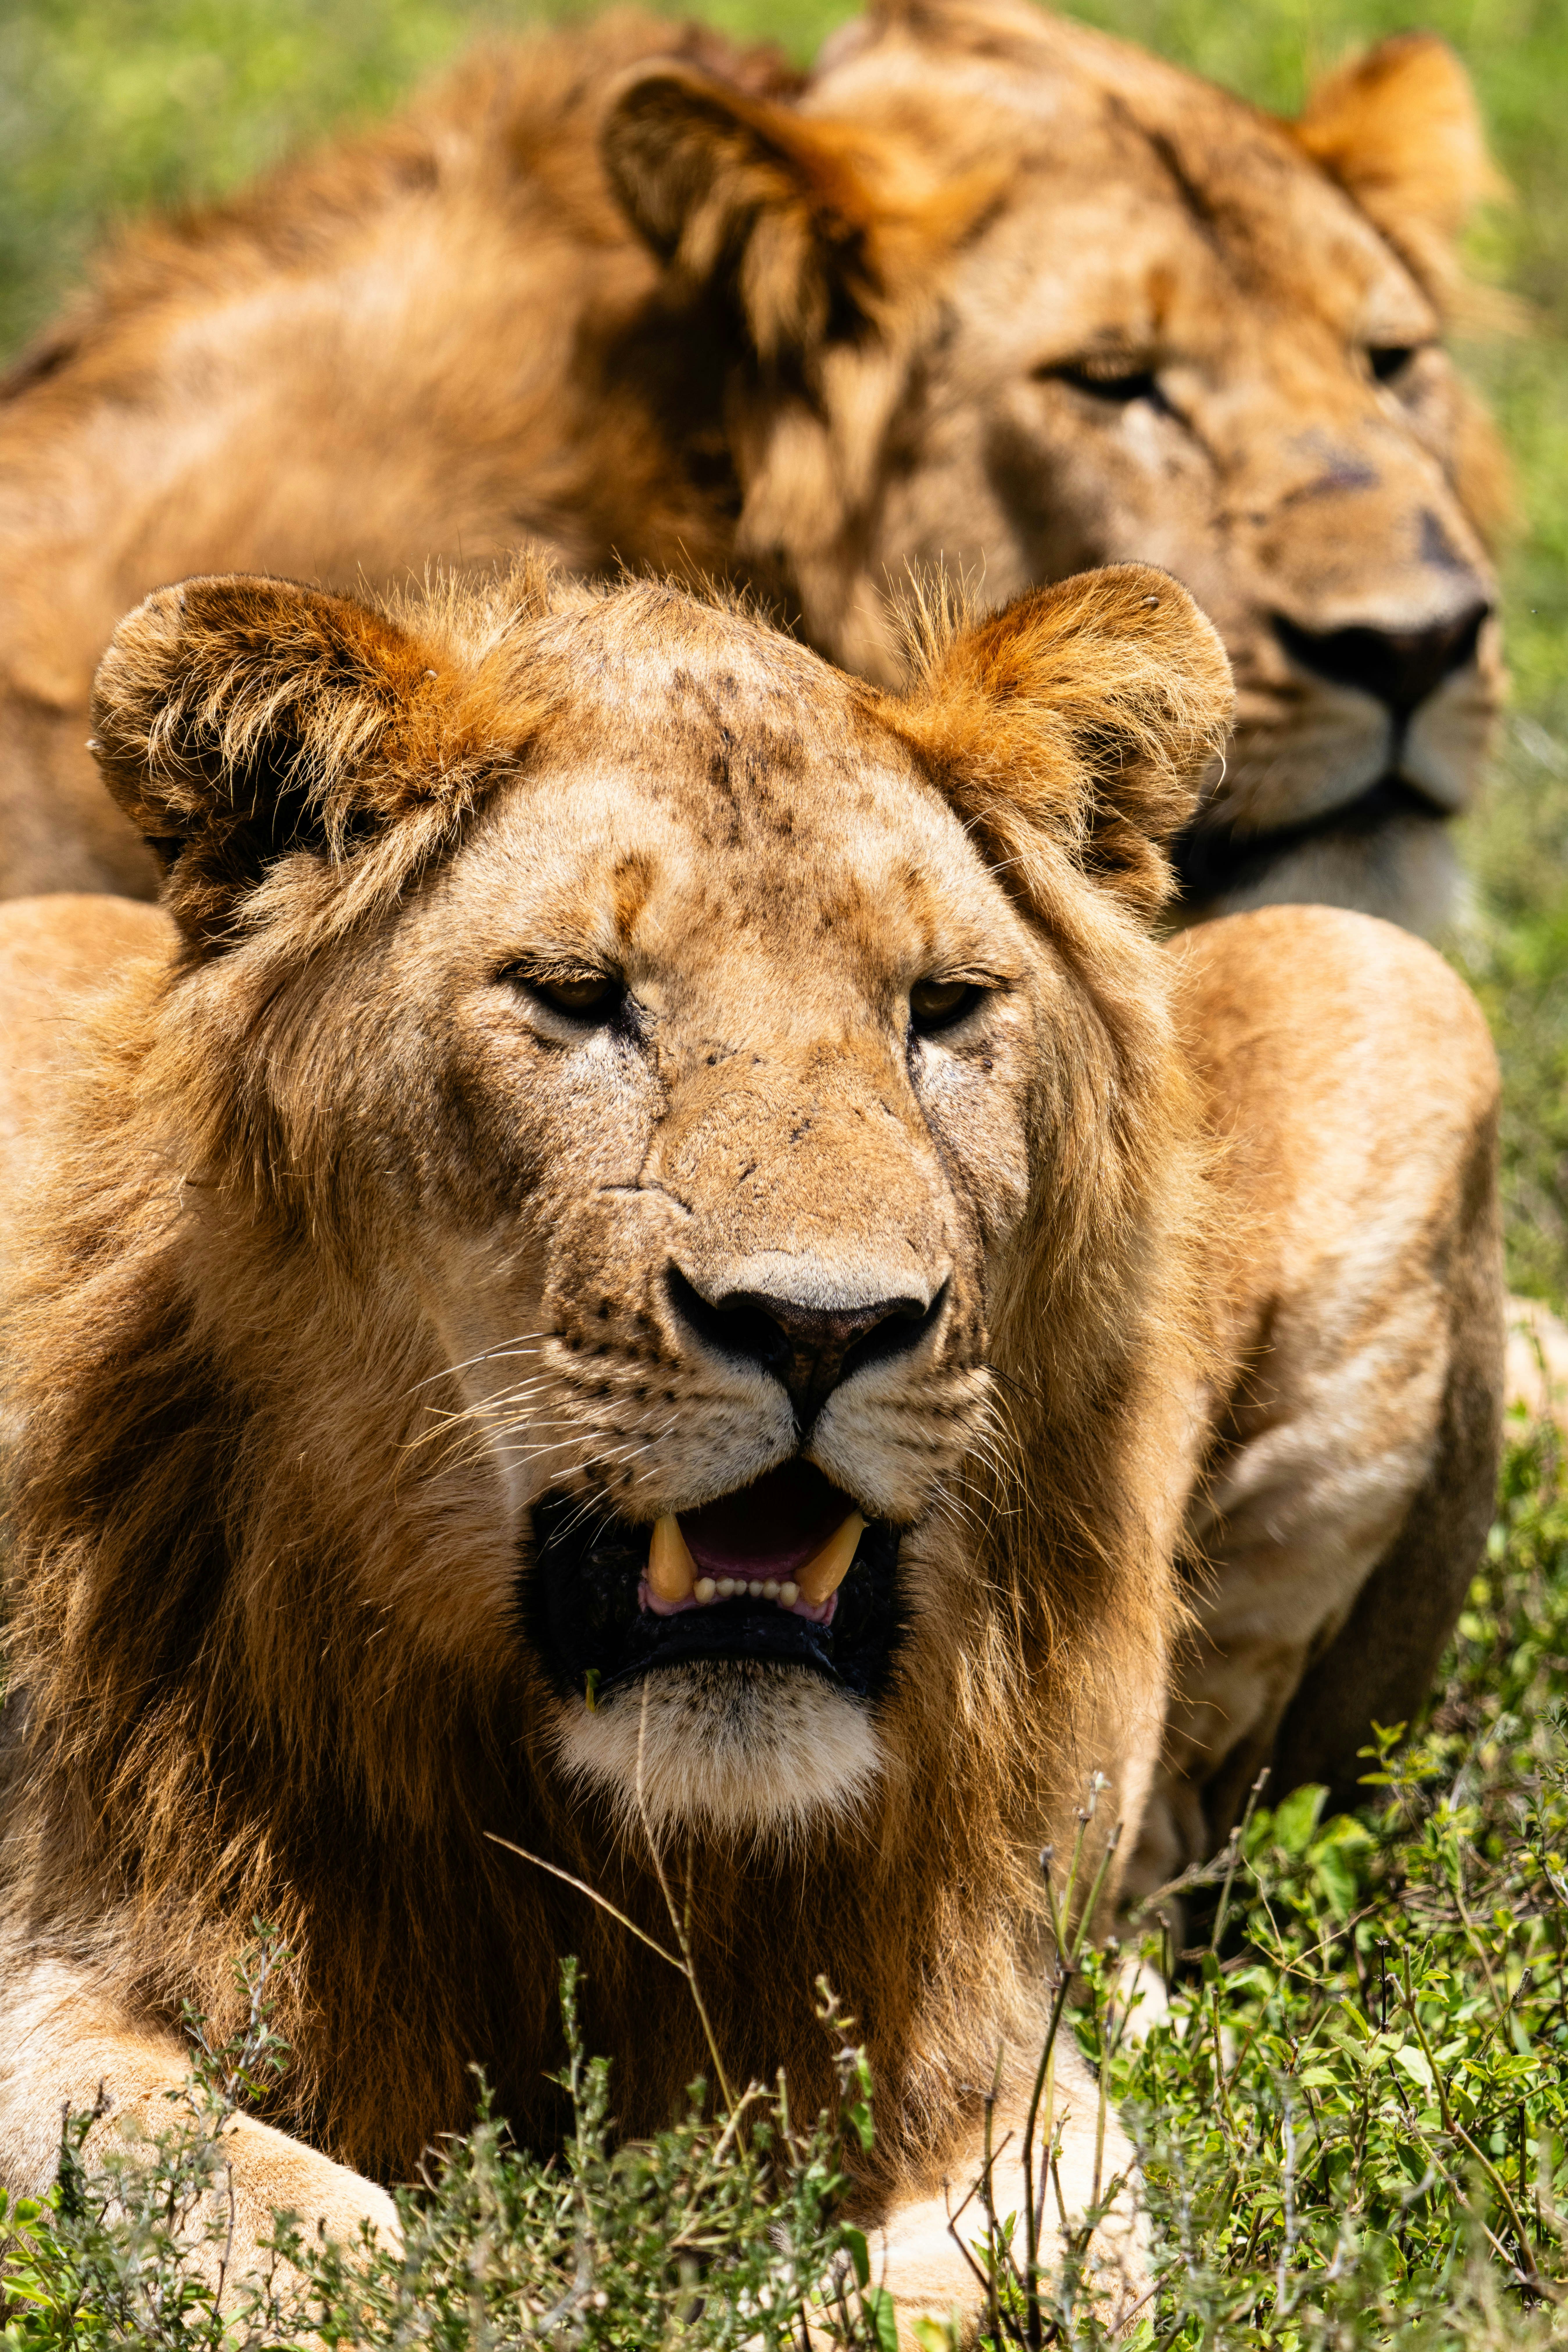 great photo recipe,how to photograph lion brothers.